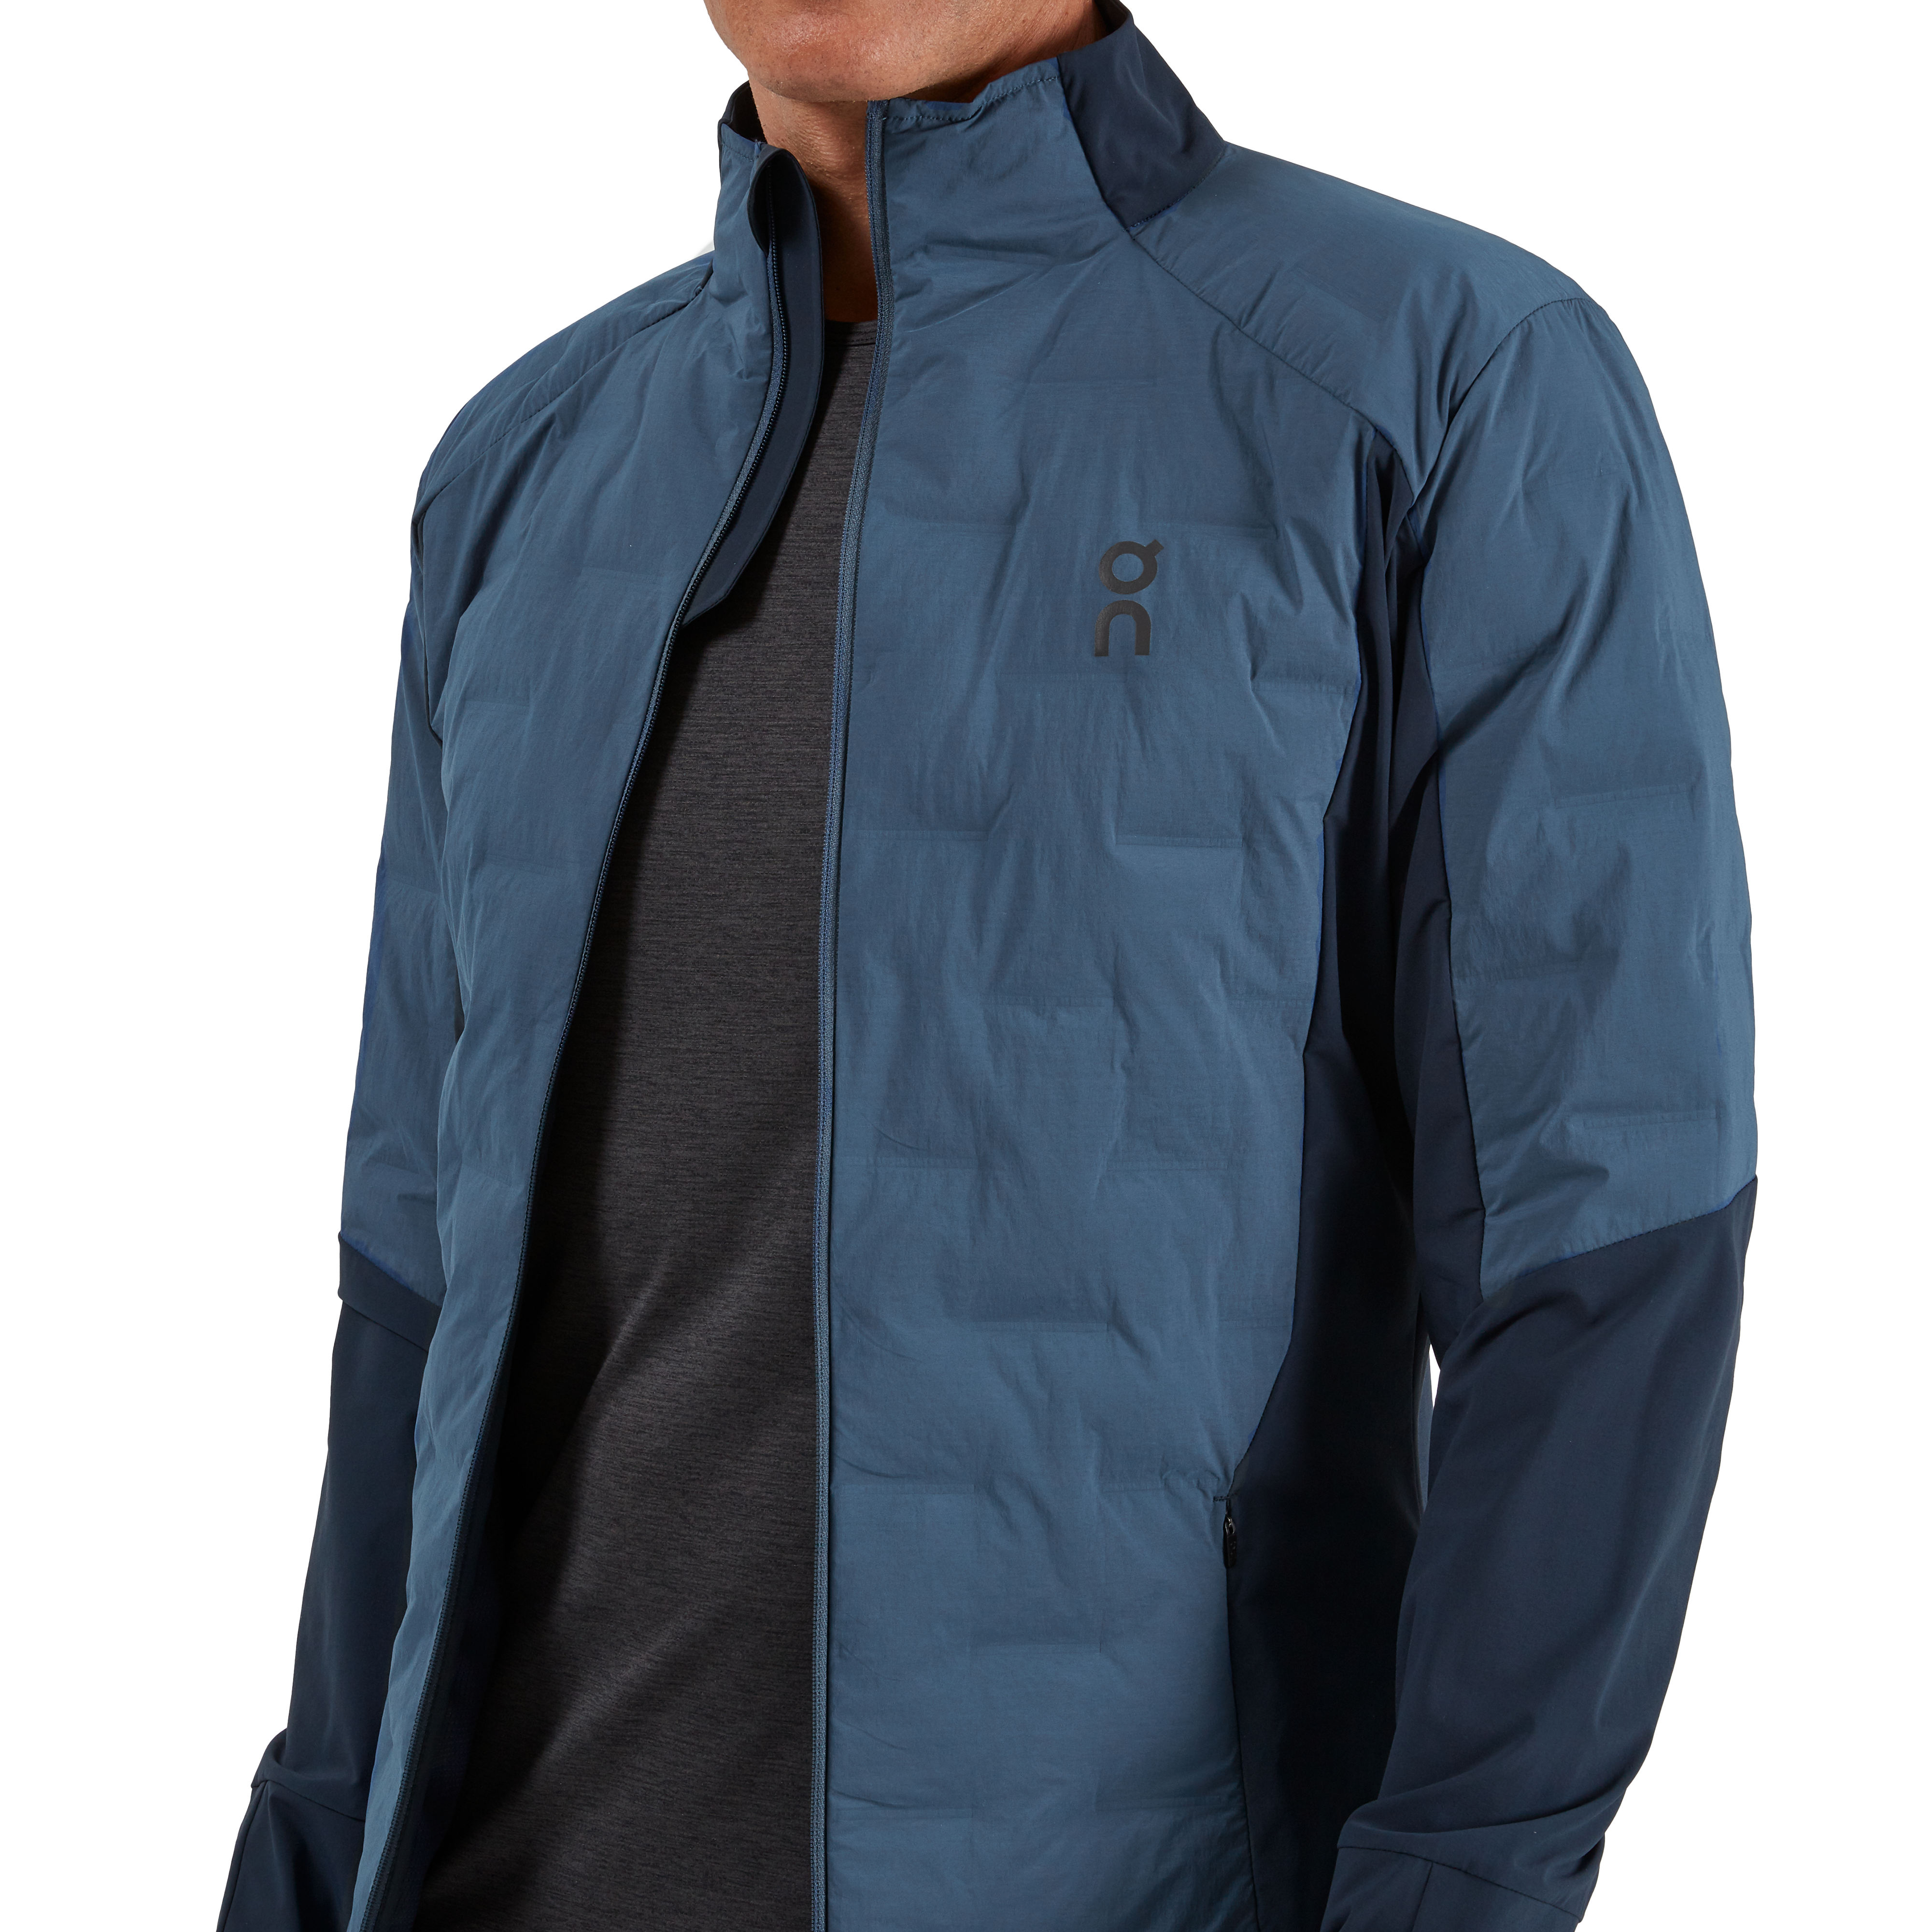 ON Running Jacket, , large image number null